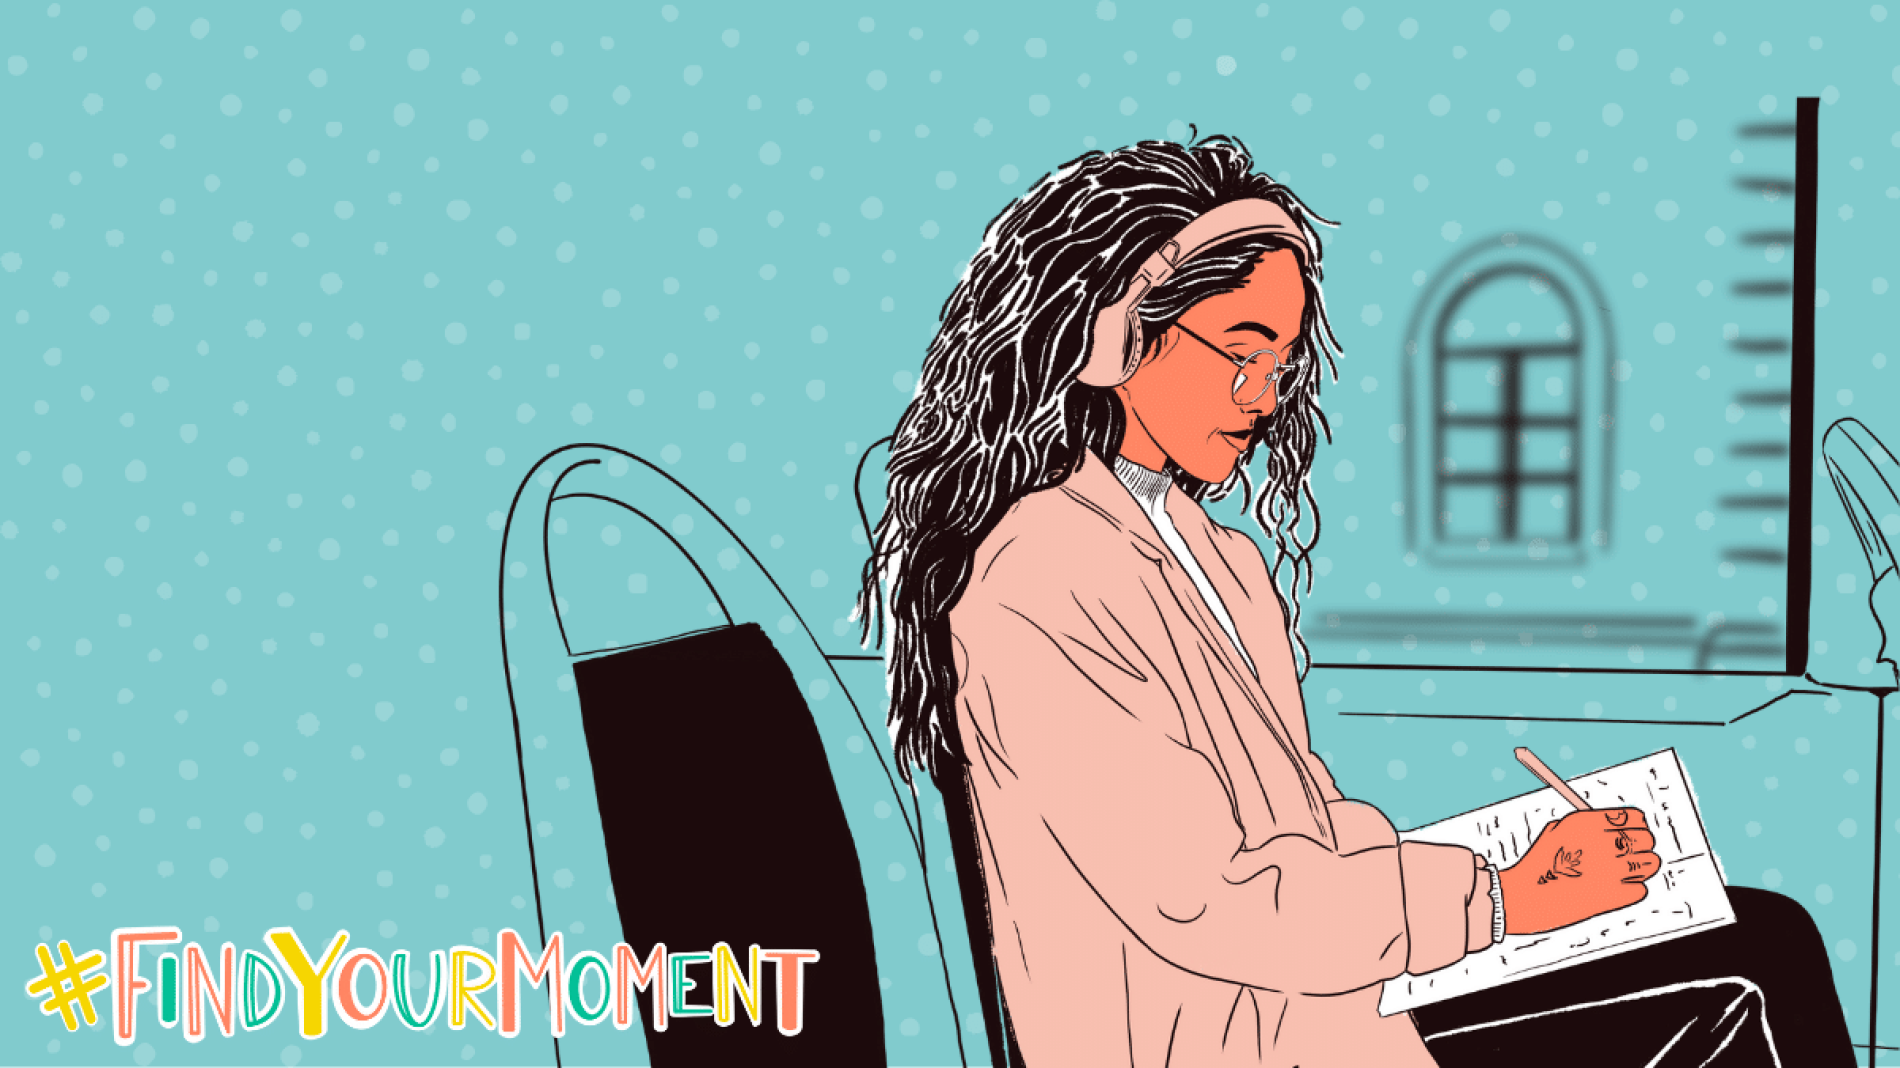 Illustration of a person sitting at a desk with a notepad and listening to music